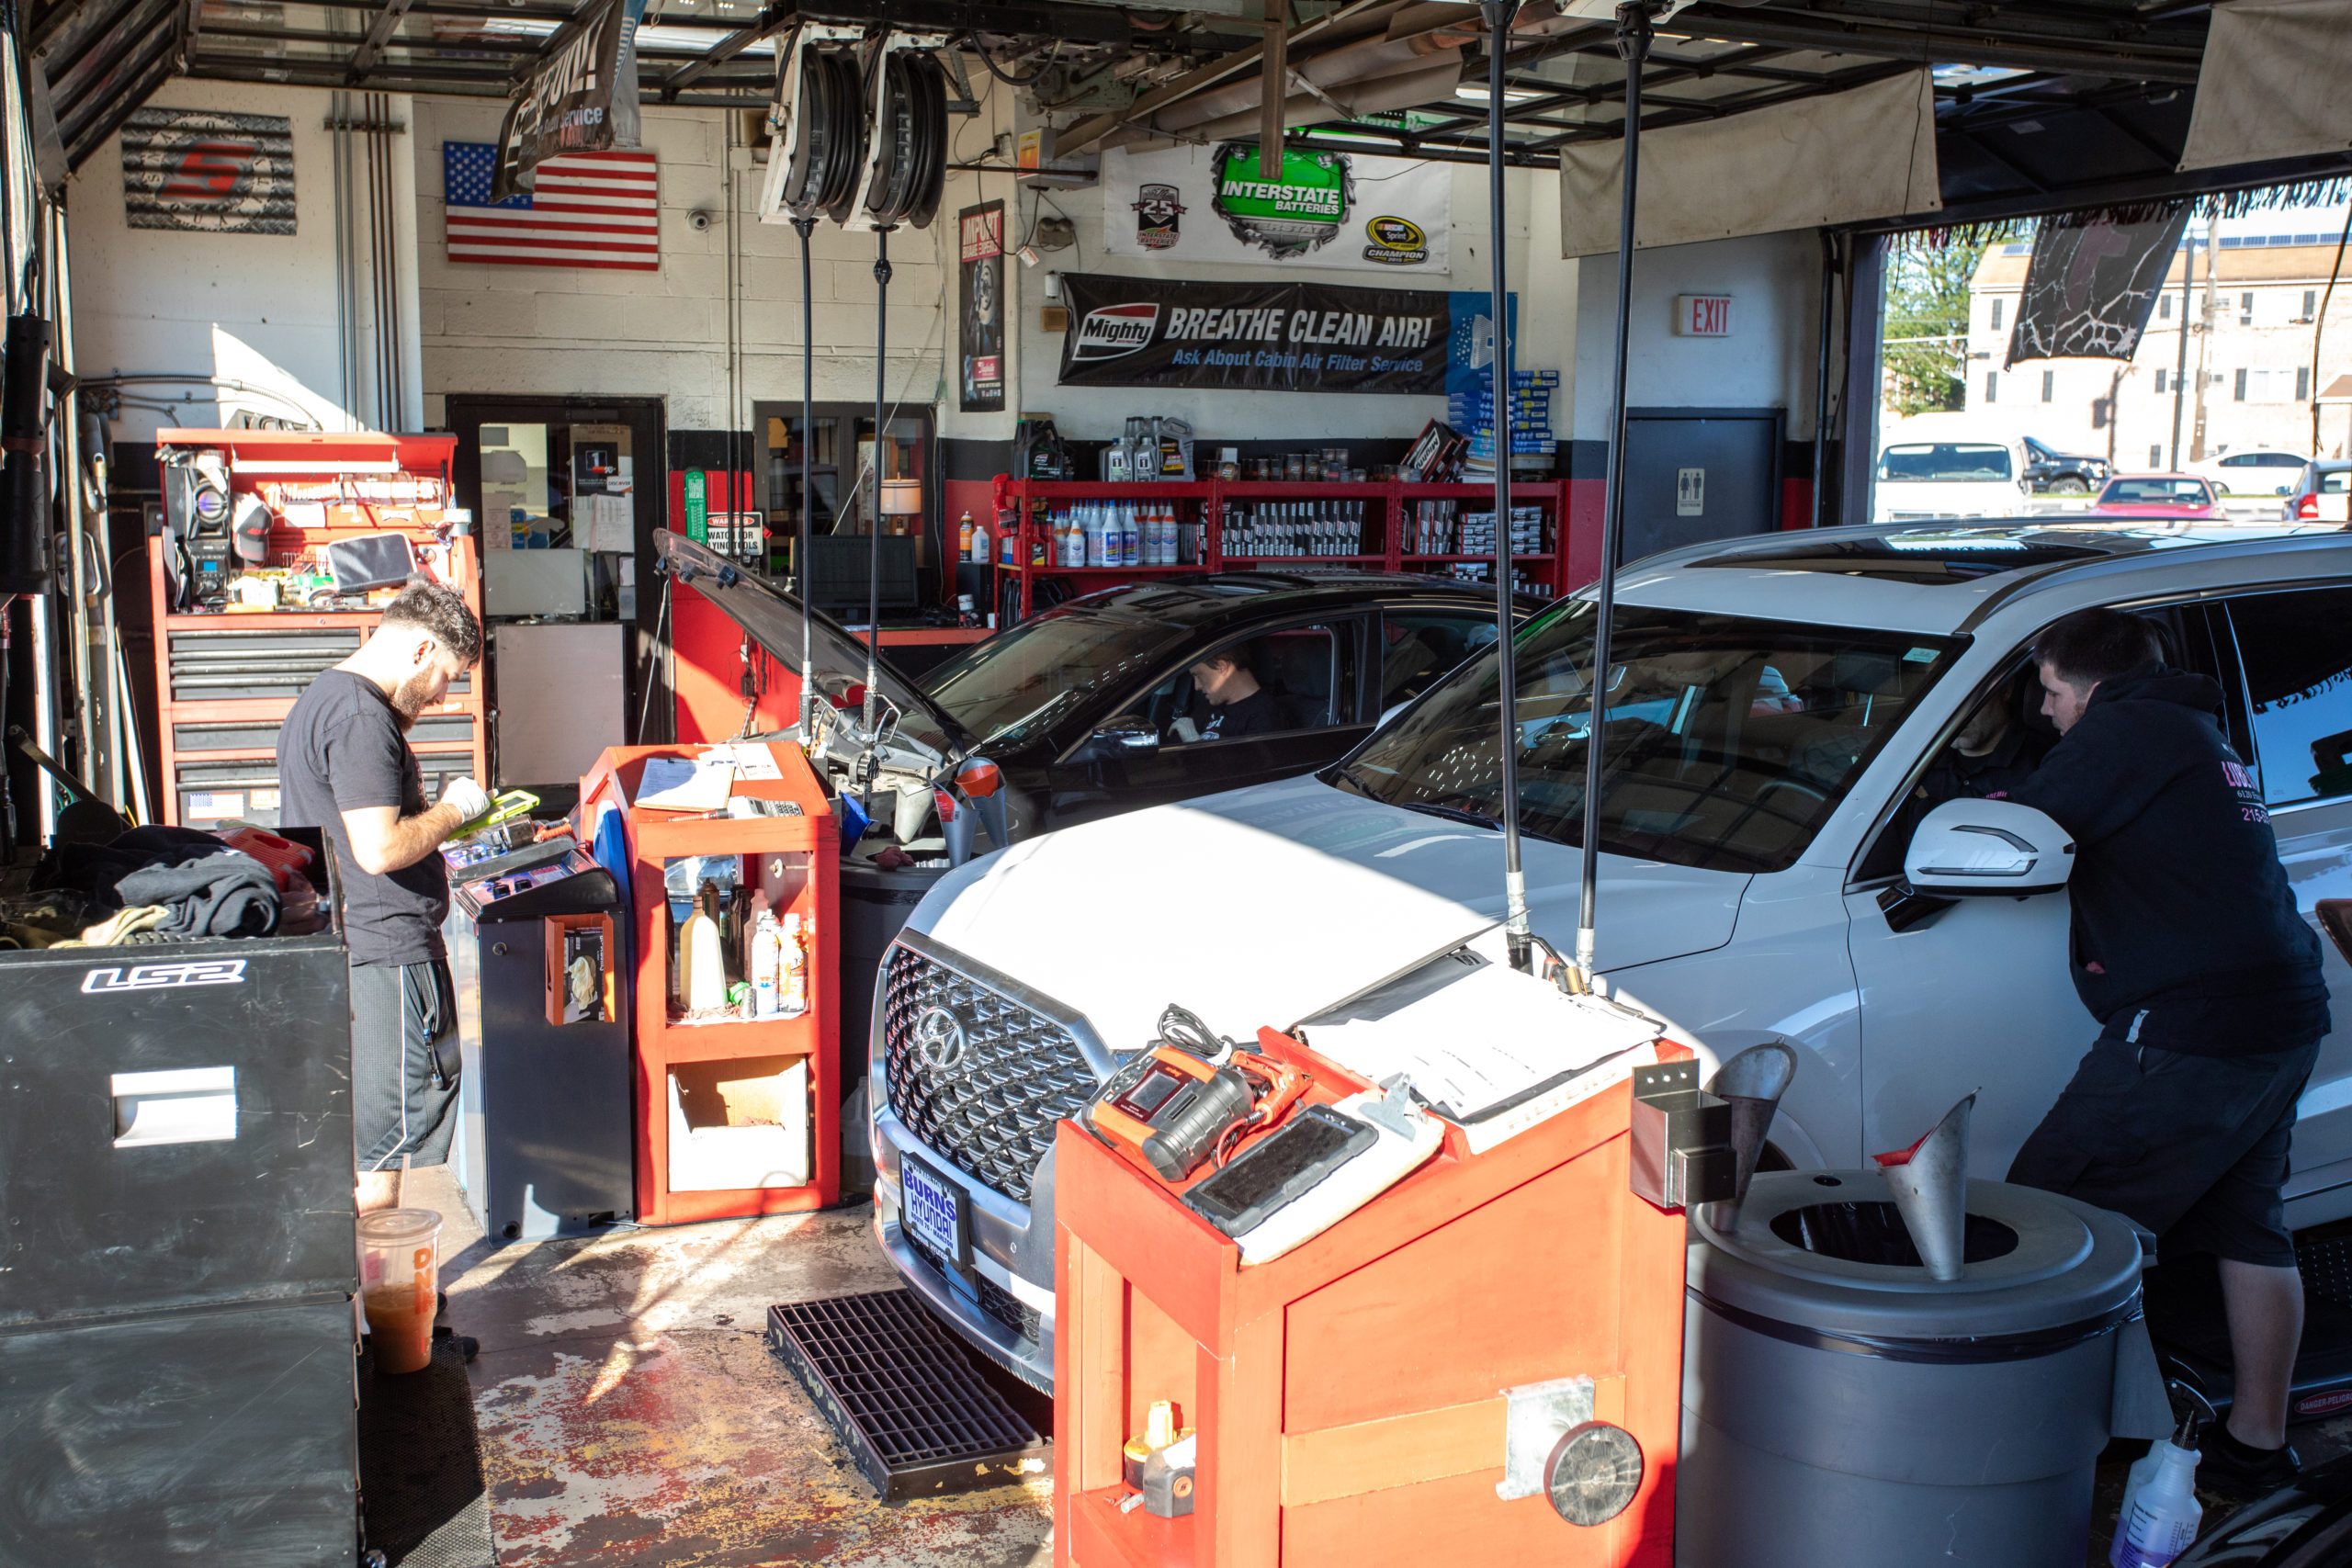 Two cars inside of a service garage being prepared for maintenance by Lube Master employees.